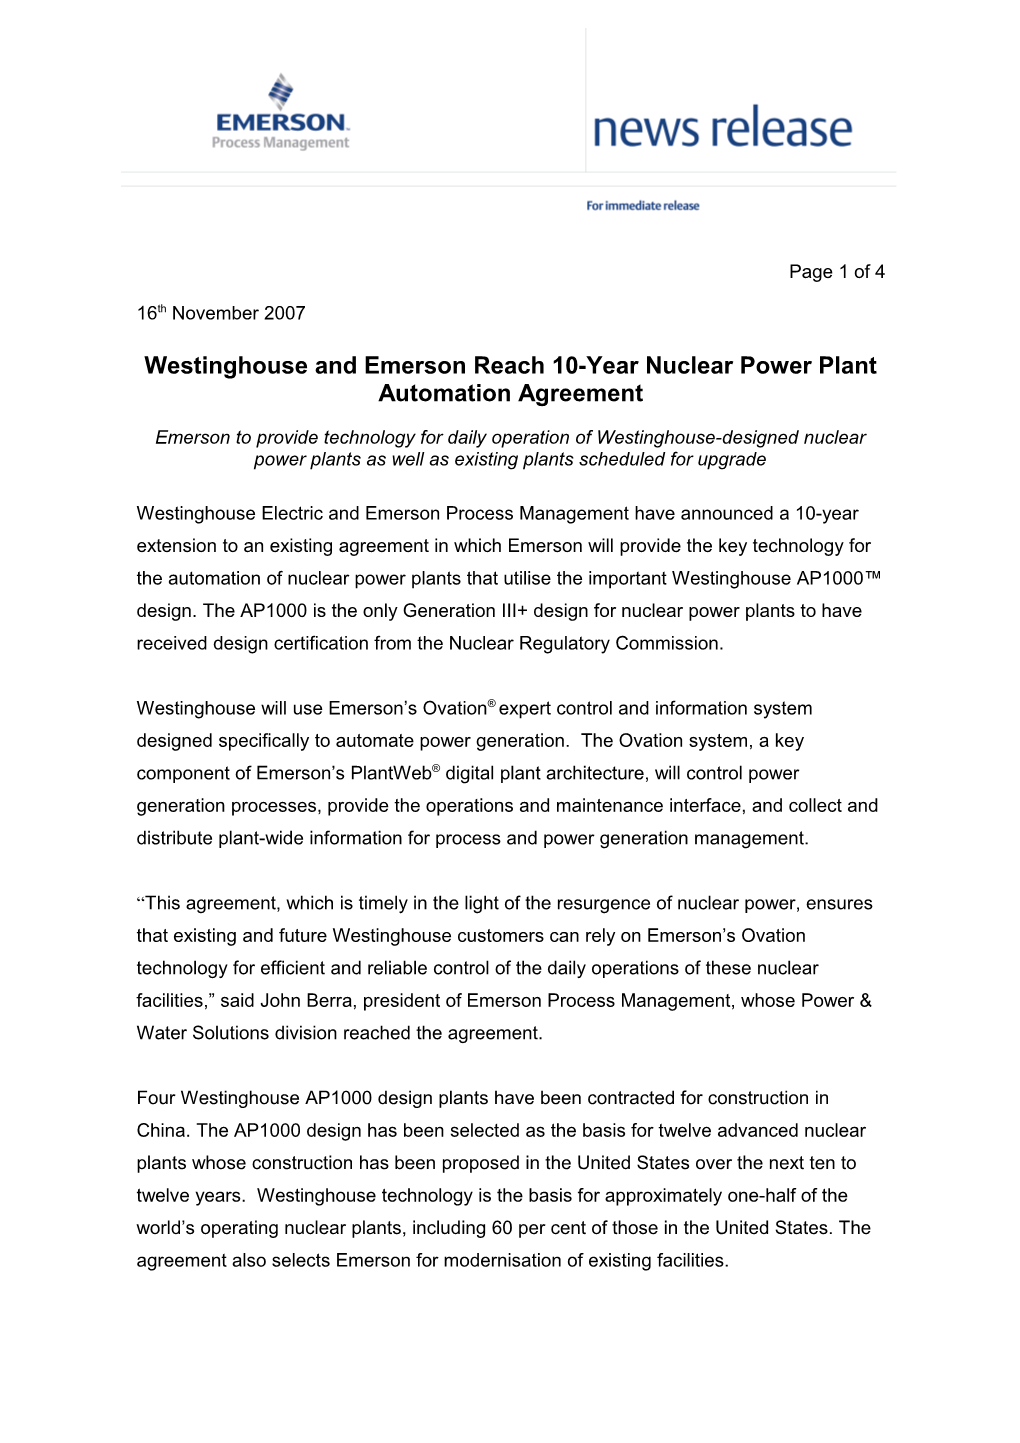 Westinghouse and Emerson Reach 10-Year Nuclear Power Plant Automation Agreement